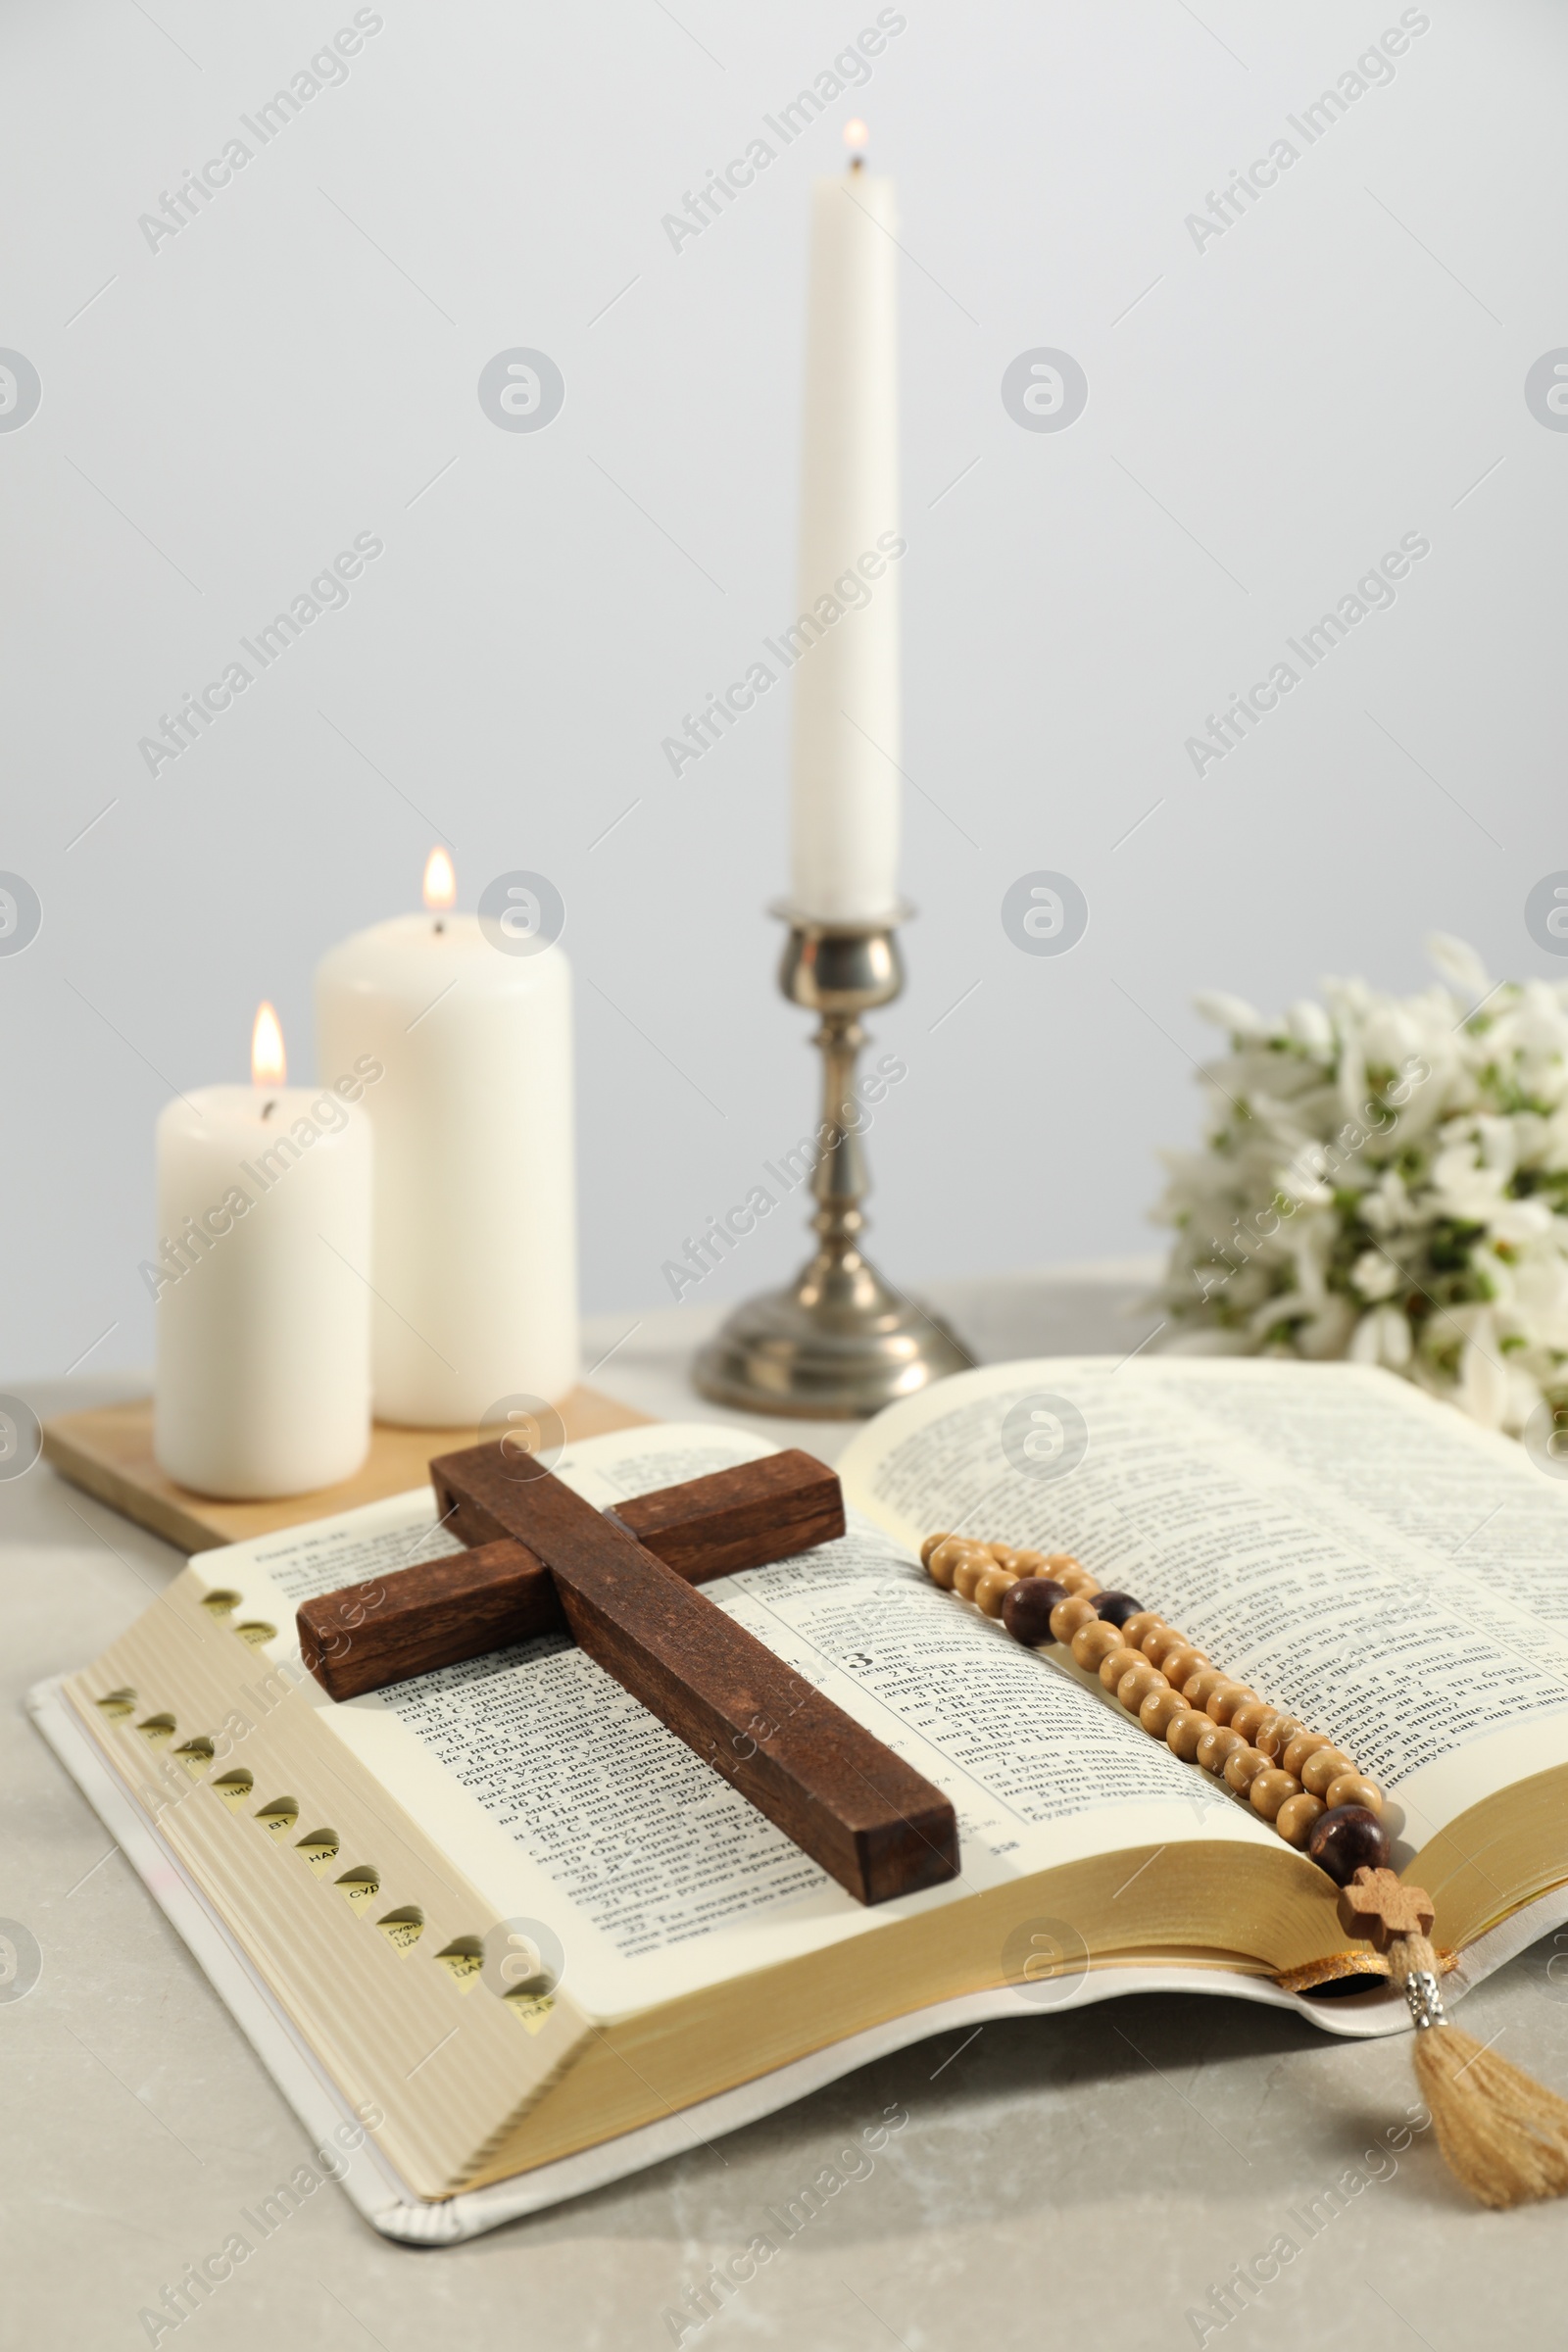 Photo of Church candles, wooden cross, rosary beads, Bible and flowers on light table